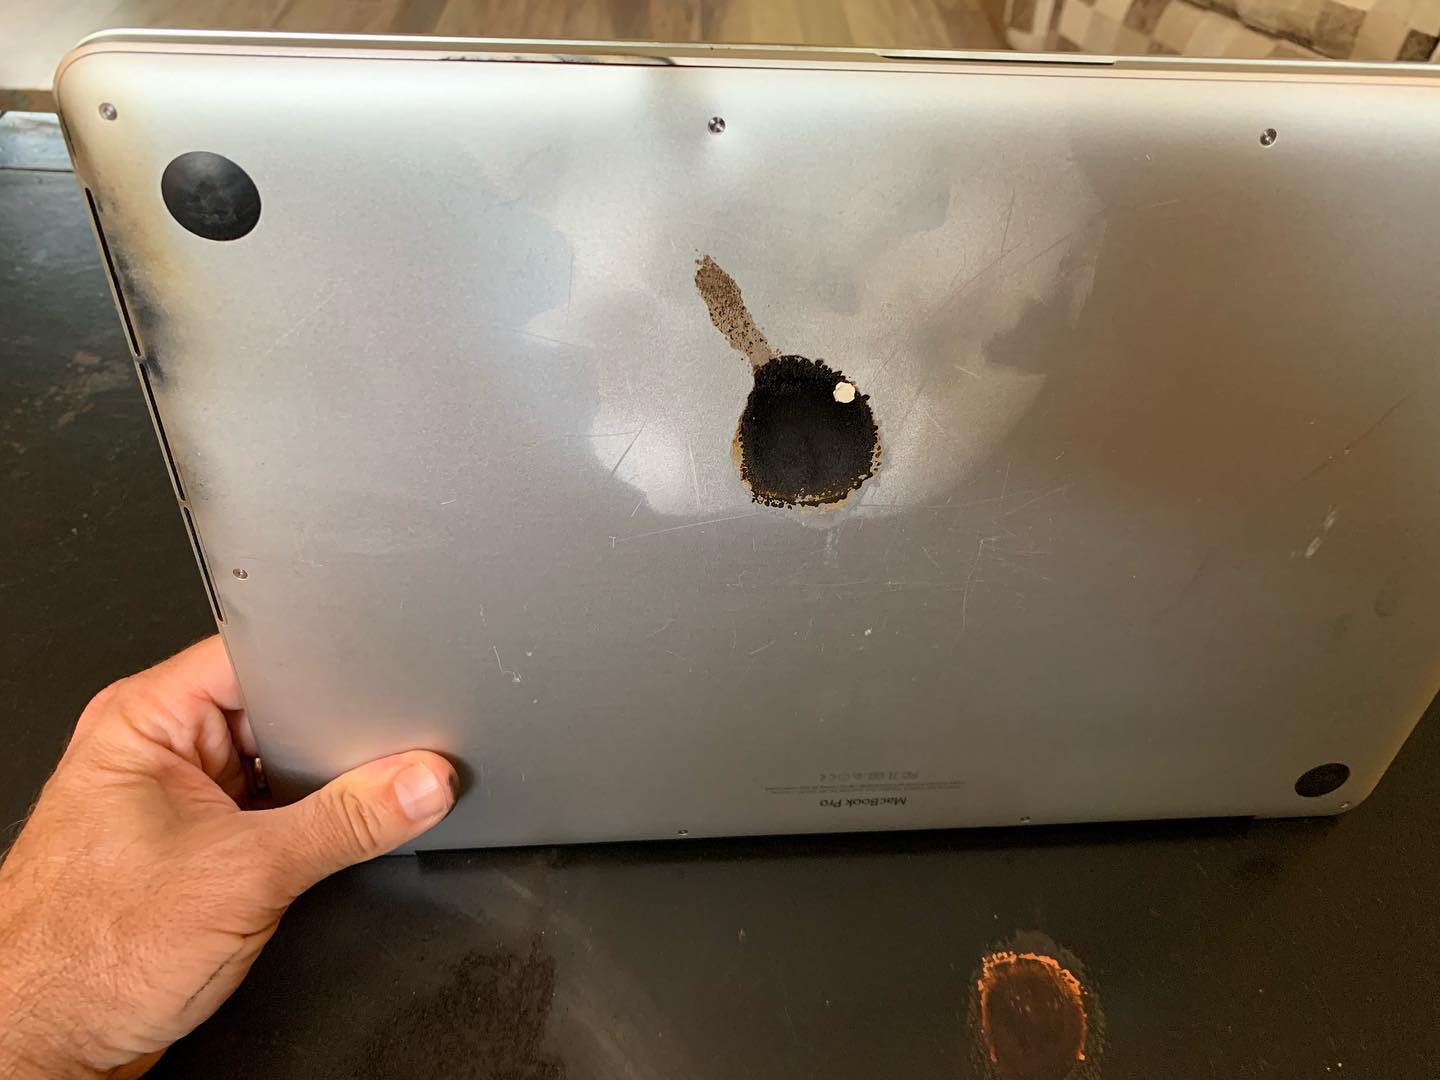 macbook pro fire may be linked to apples recent laptop recall 3